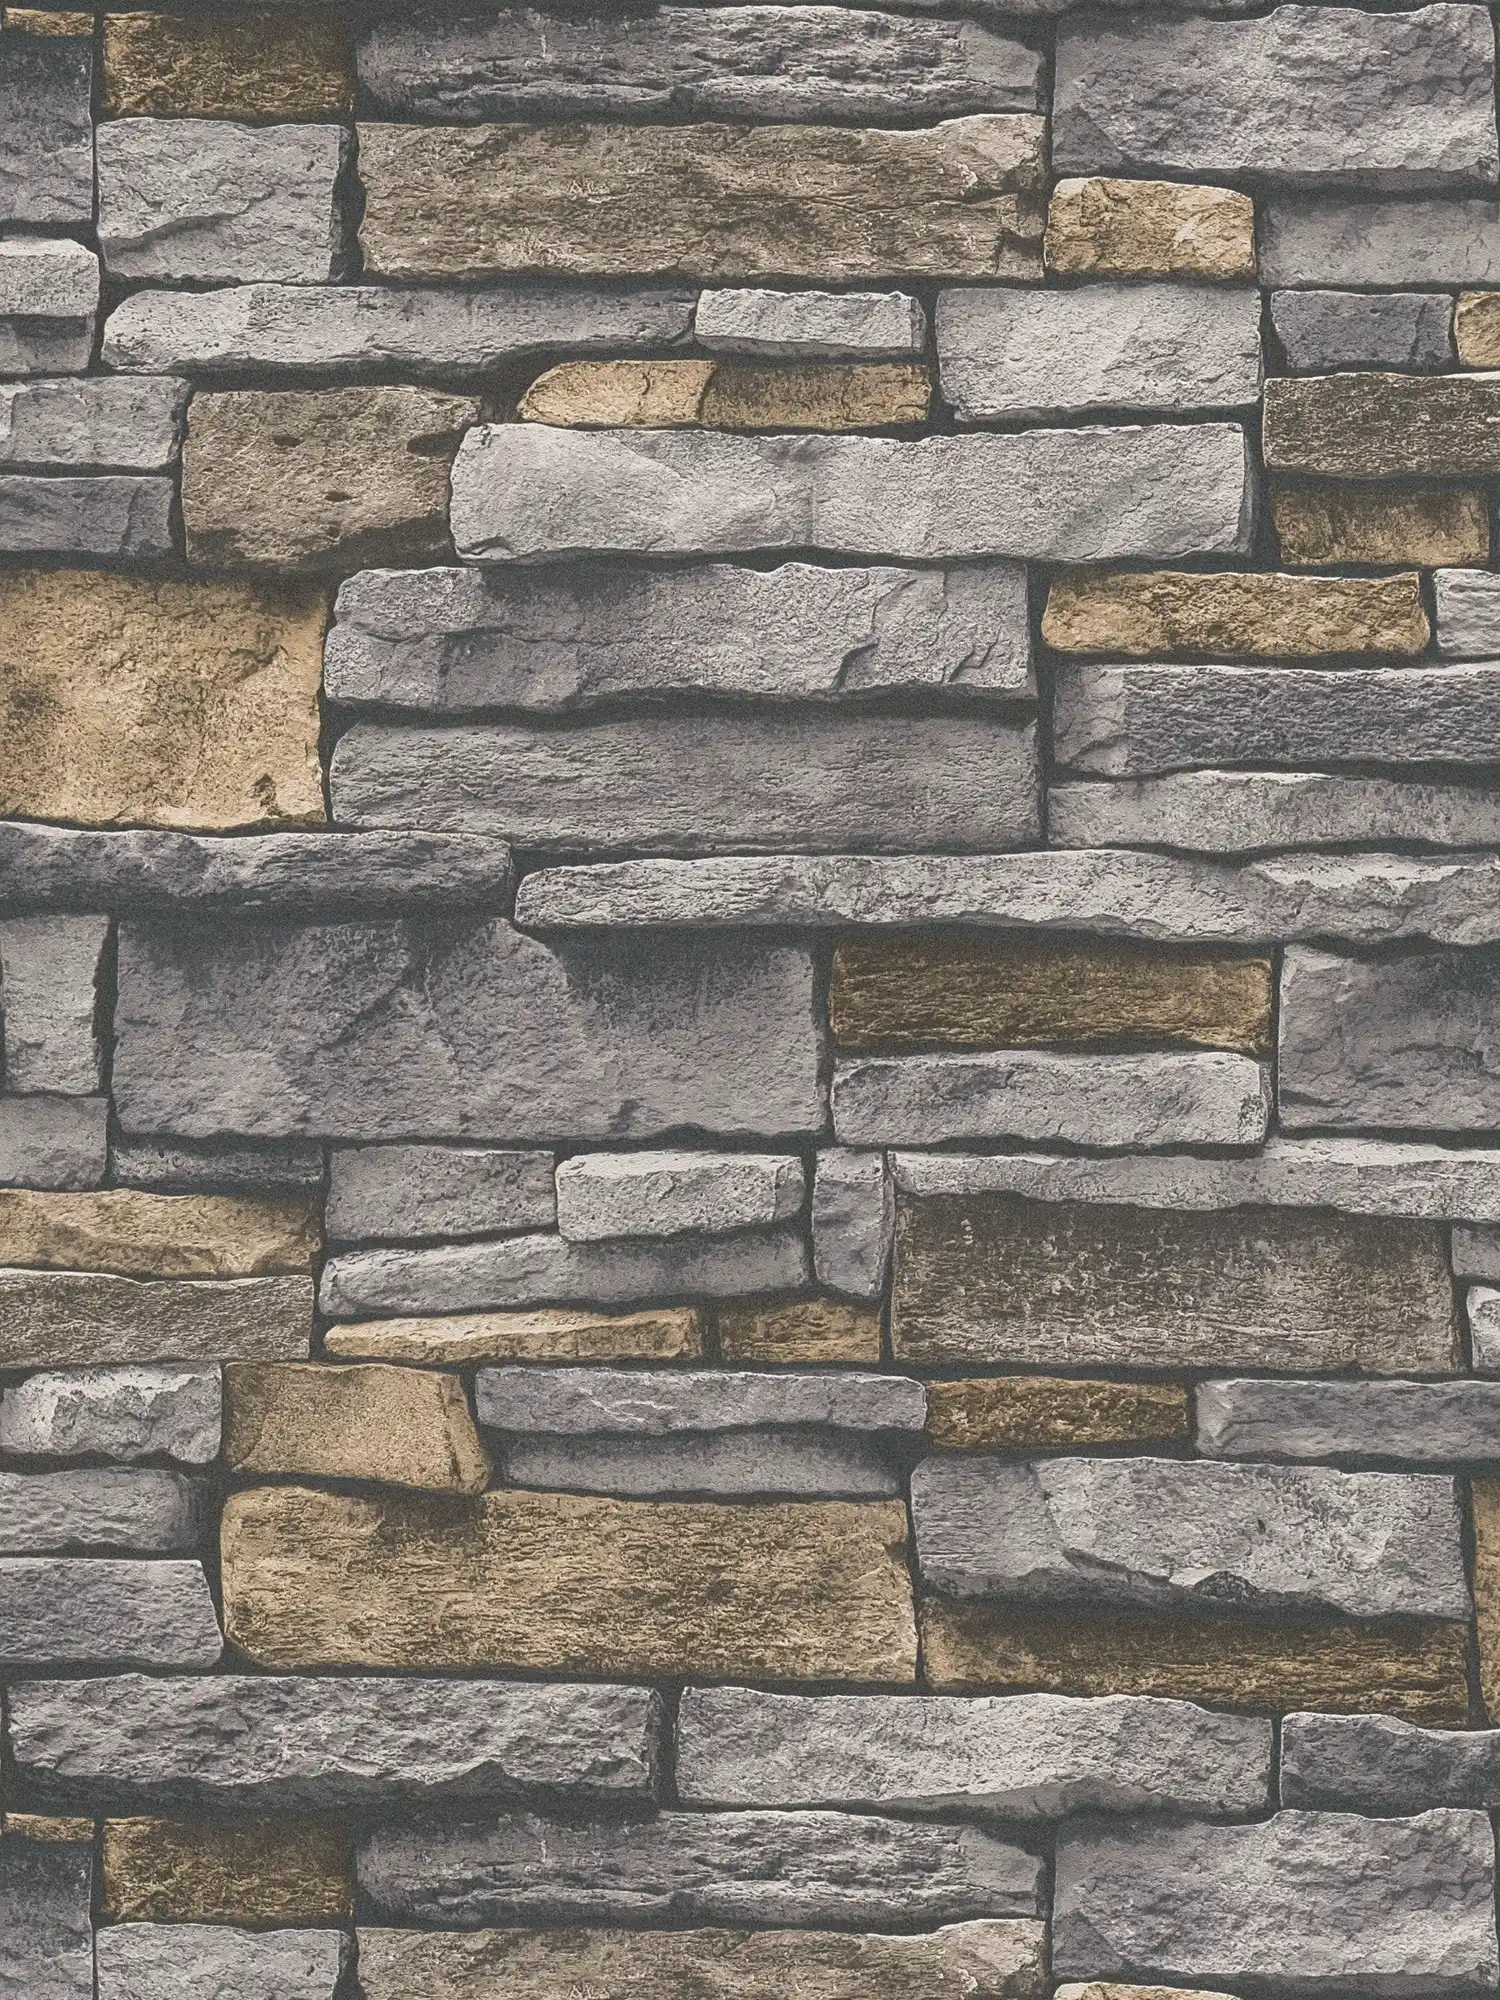         Non-woven wallpaper in stone look with natural stone wall - grey, beige
    